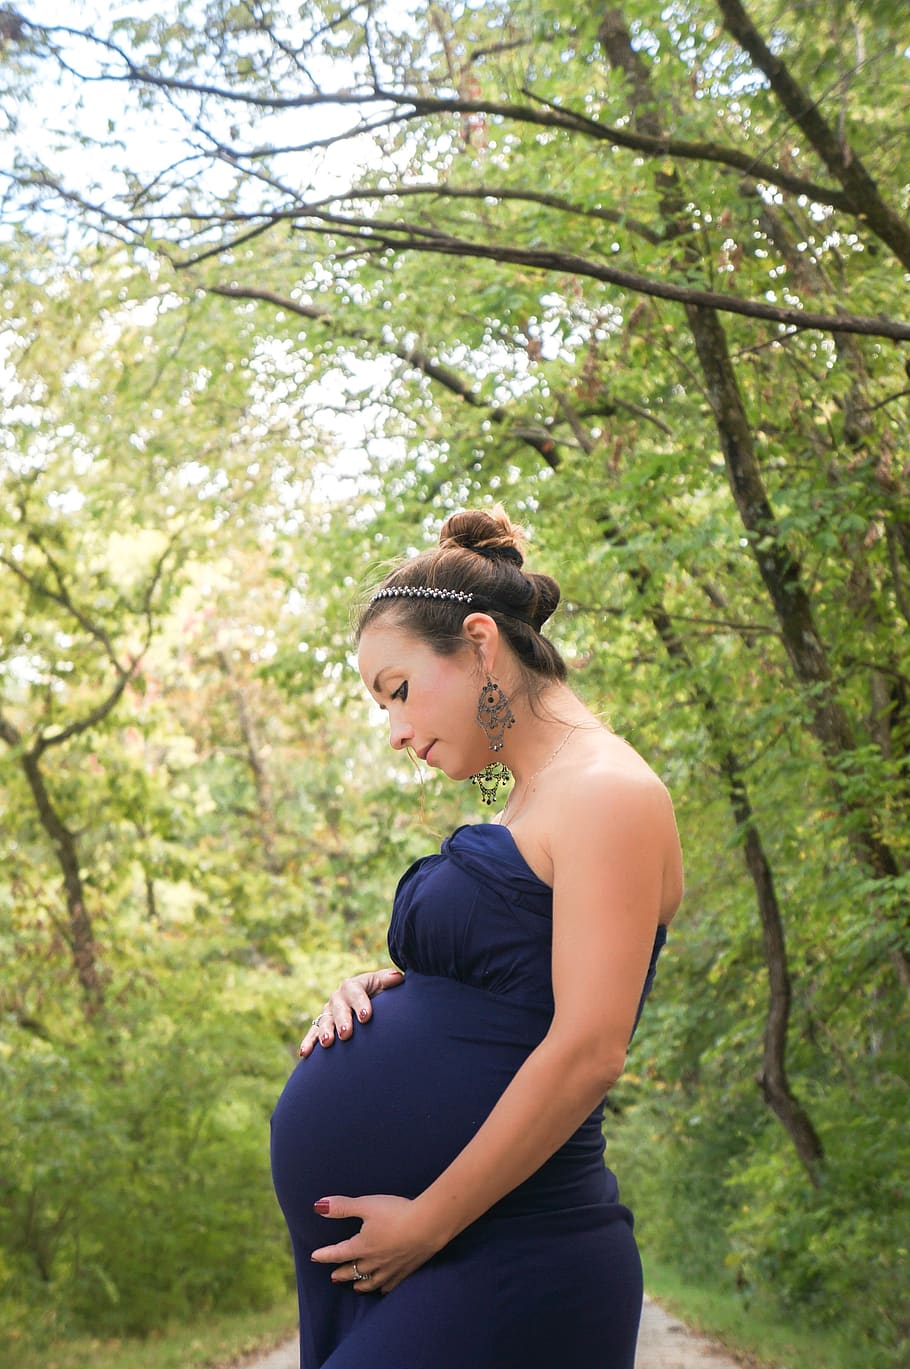 people, pregnancy, woman, forest, waiting for baby, future mom, tree, young adult, standing, pregnant